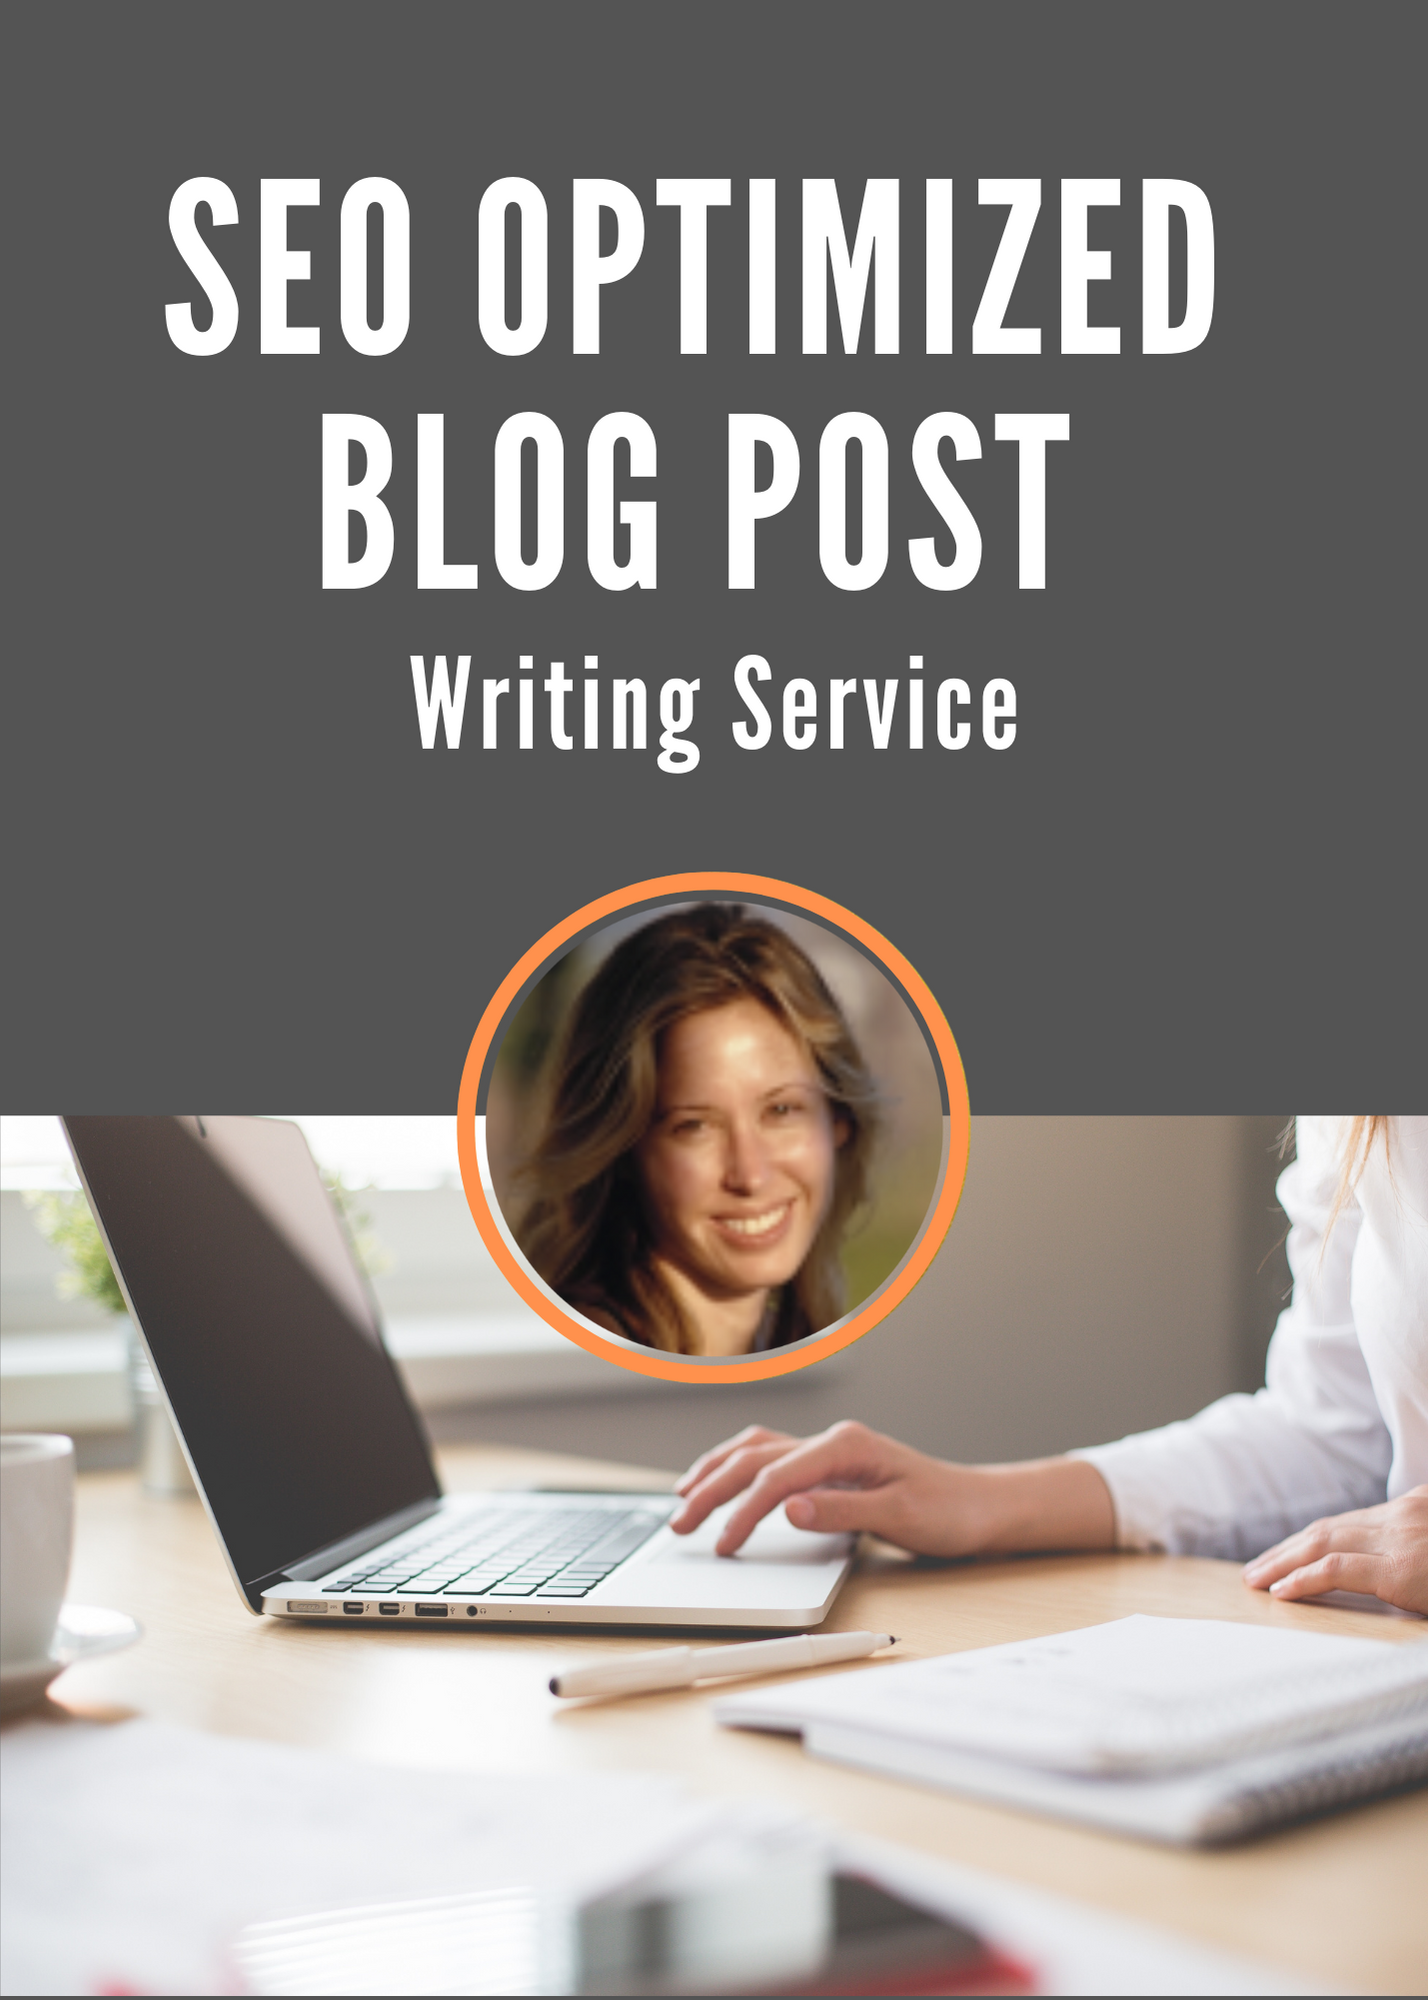 blog post writing service from a freelance writer